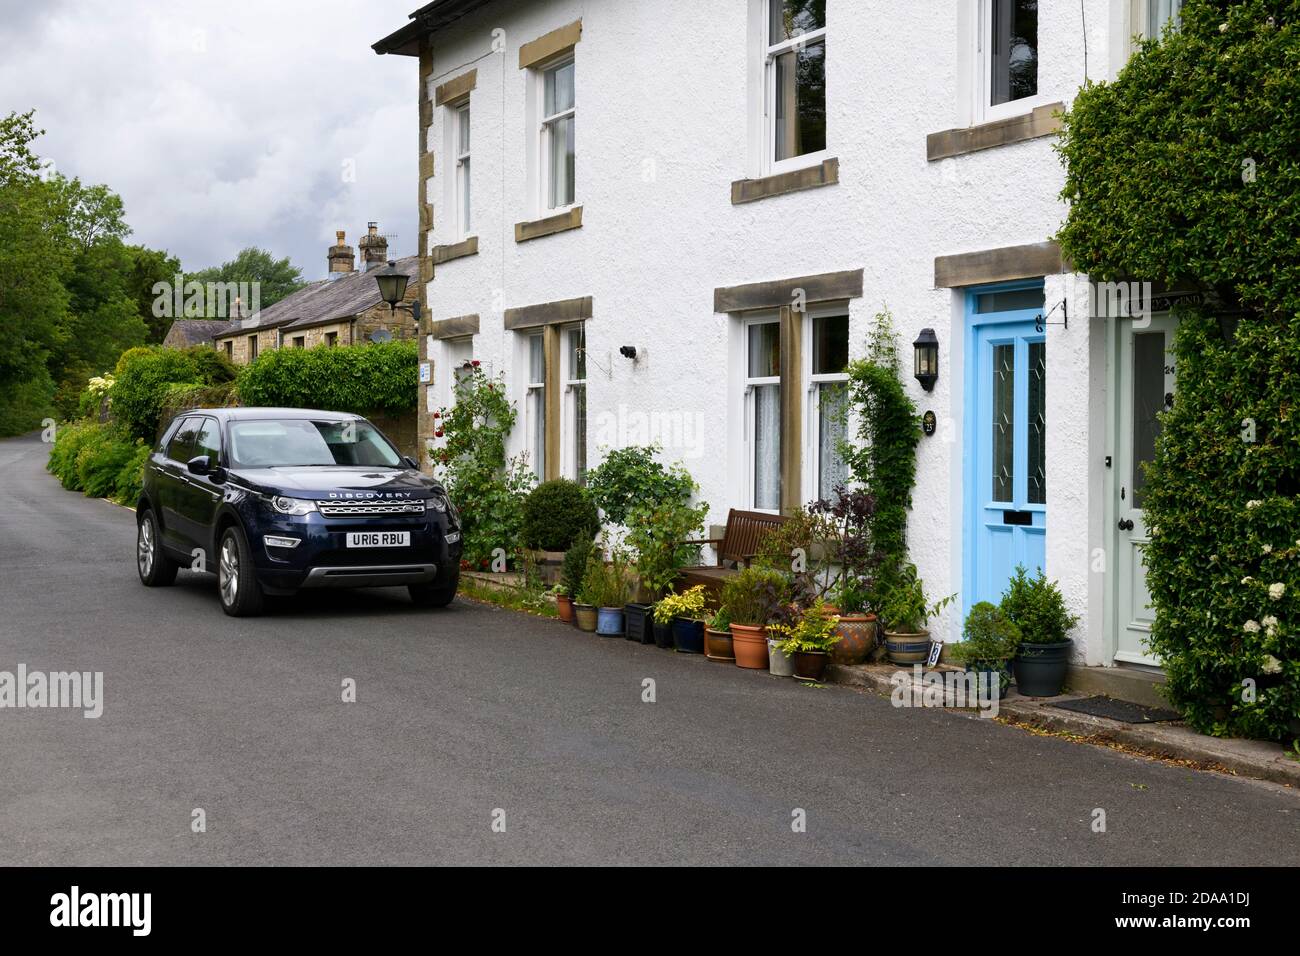 Row of traditional whitewashed stone cottages in scenic rural village, Land Rover Discovery Sport parked on road - Linton, North Yorkshire England UK. Stock Photo